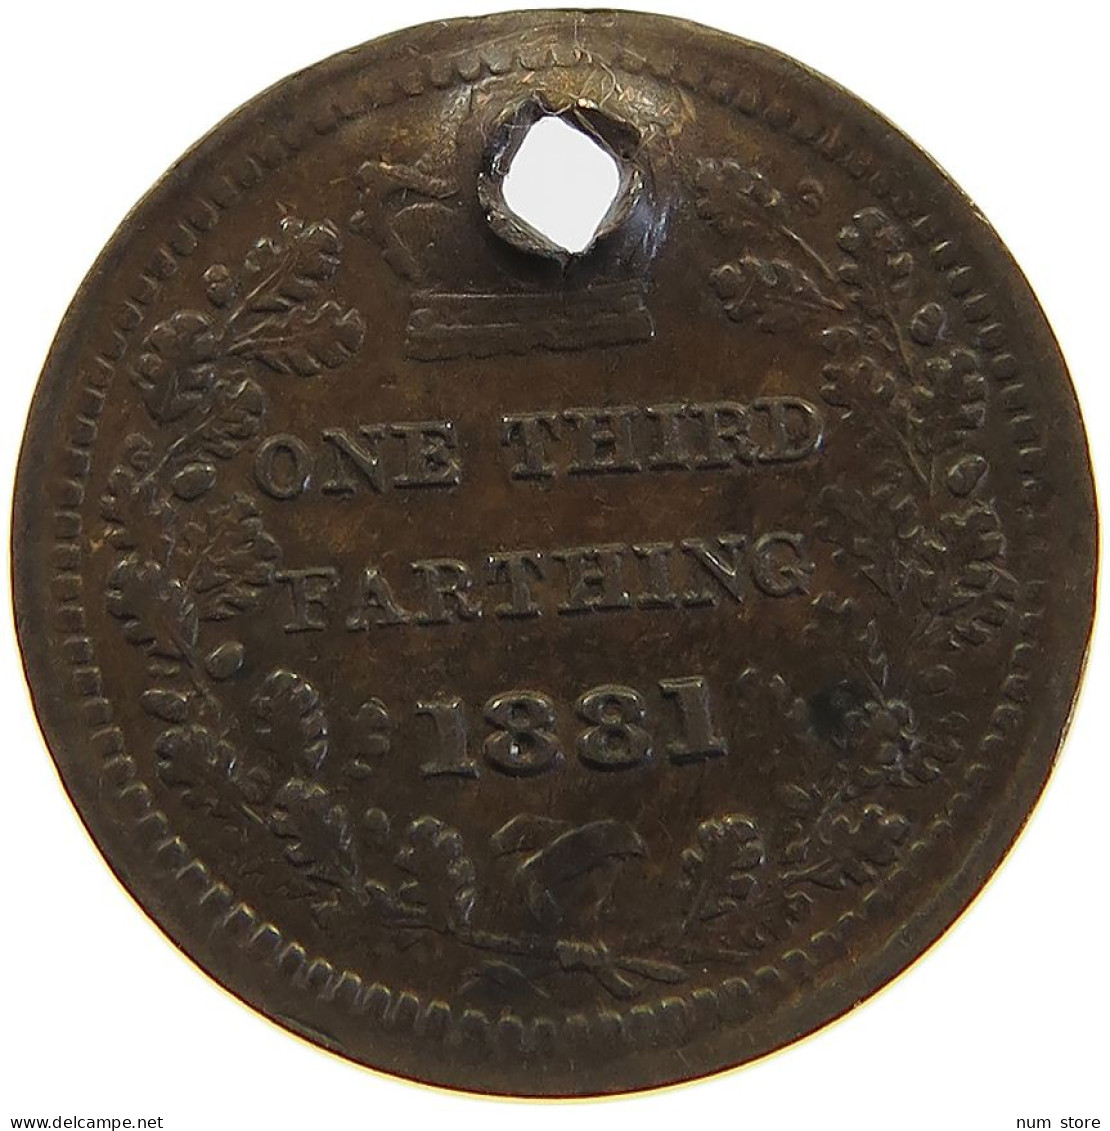 GREAT BRITAIN 1/3 FARTHING 1881 Victoria 1837-1901 #c045 0095 - A. 1/4 - 1/3 - 1/2 Farthing